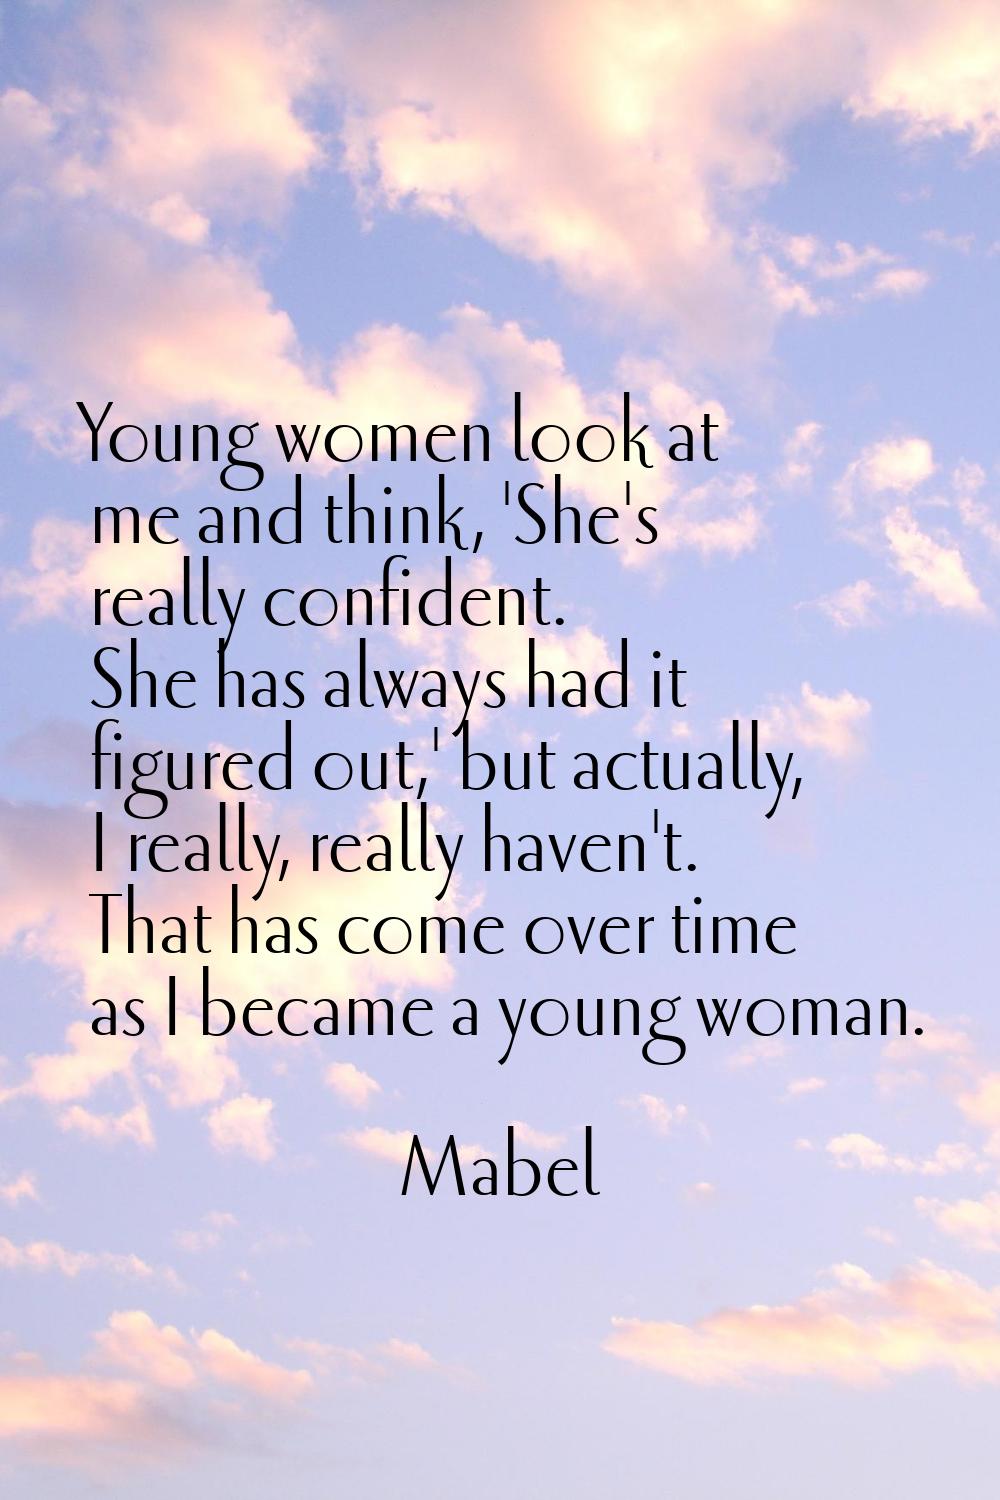 Young women look at me and think, 'She's really confident. She has always had it figured out,' but 